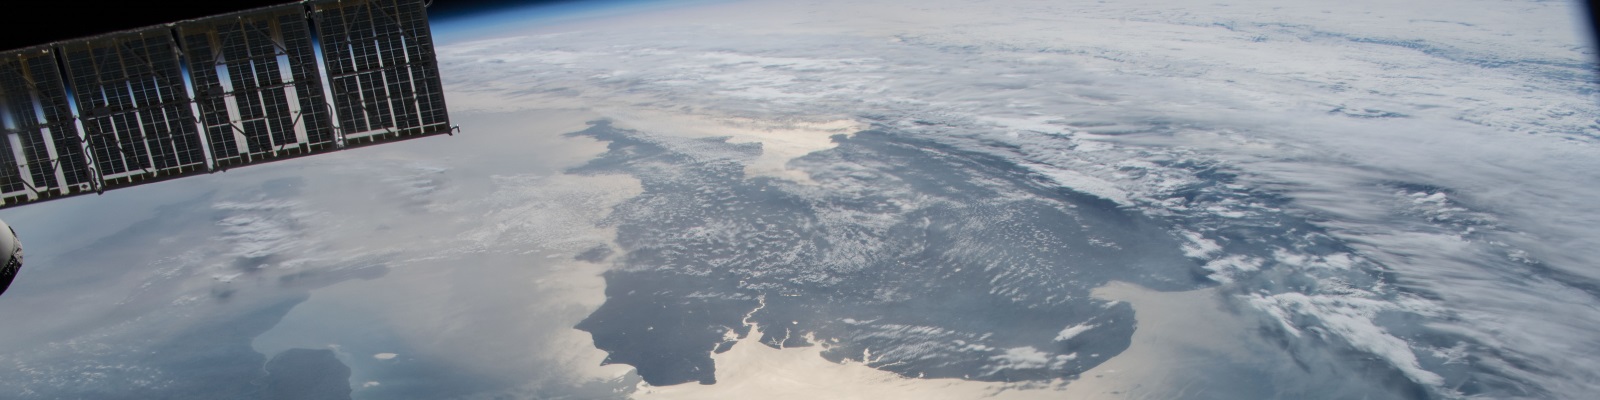 English Channel from the International Space Station